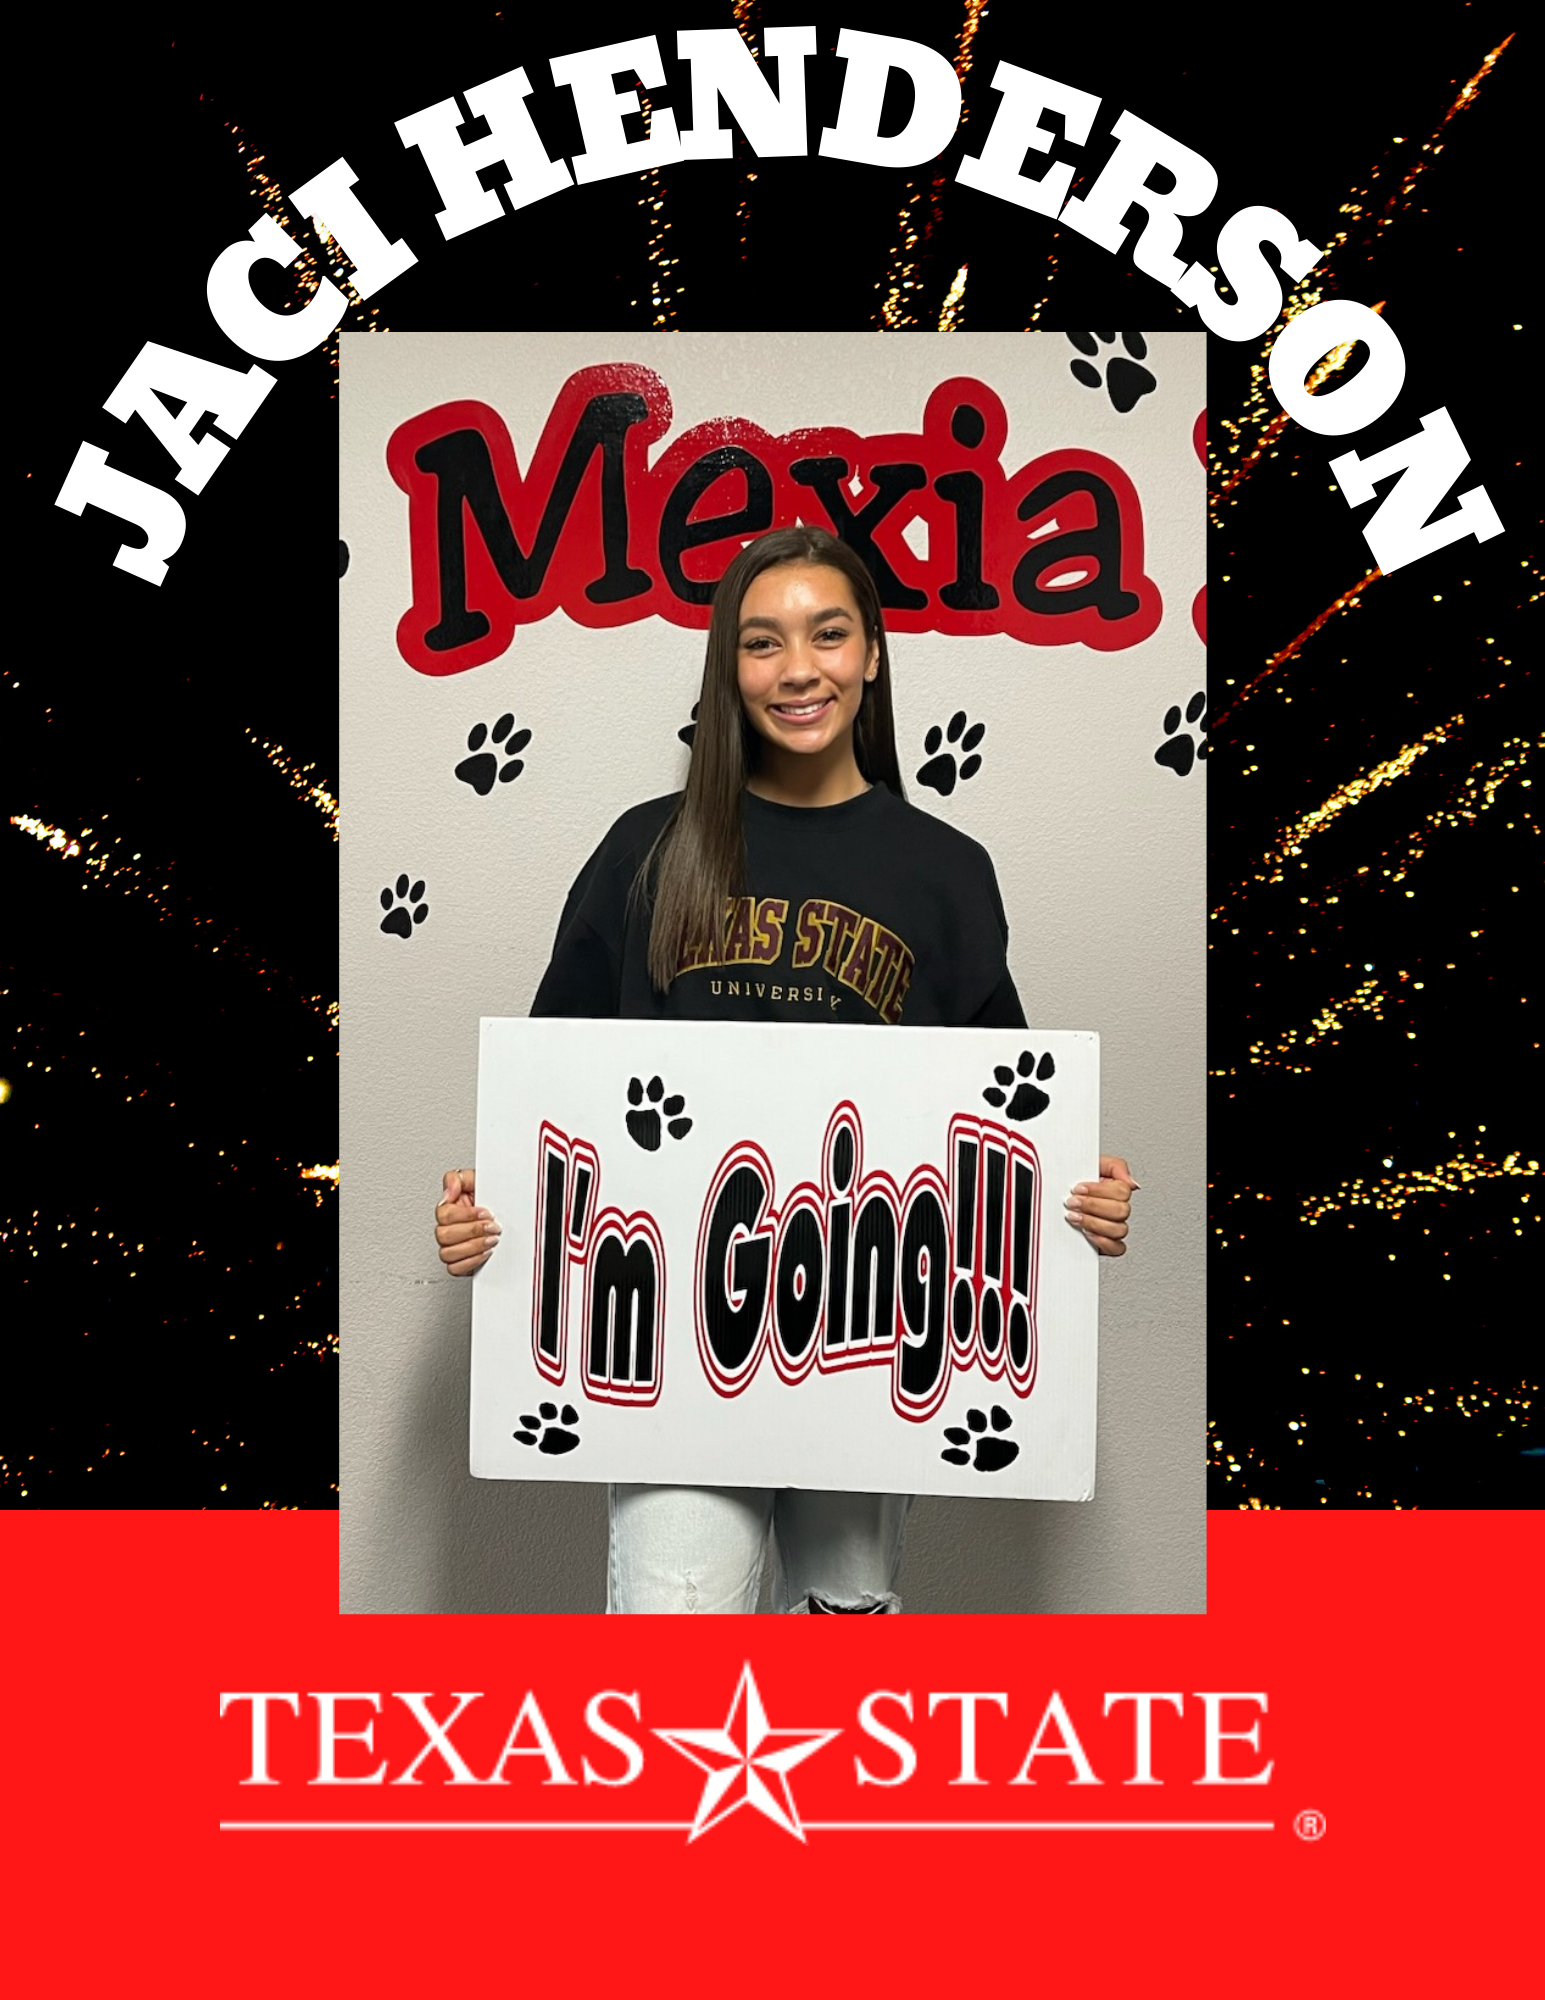 Jaci Henderson - I'm Going! - Texas State